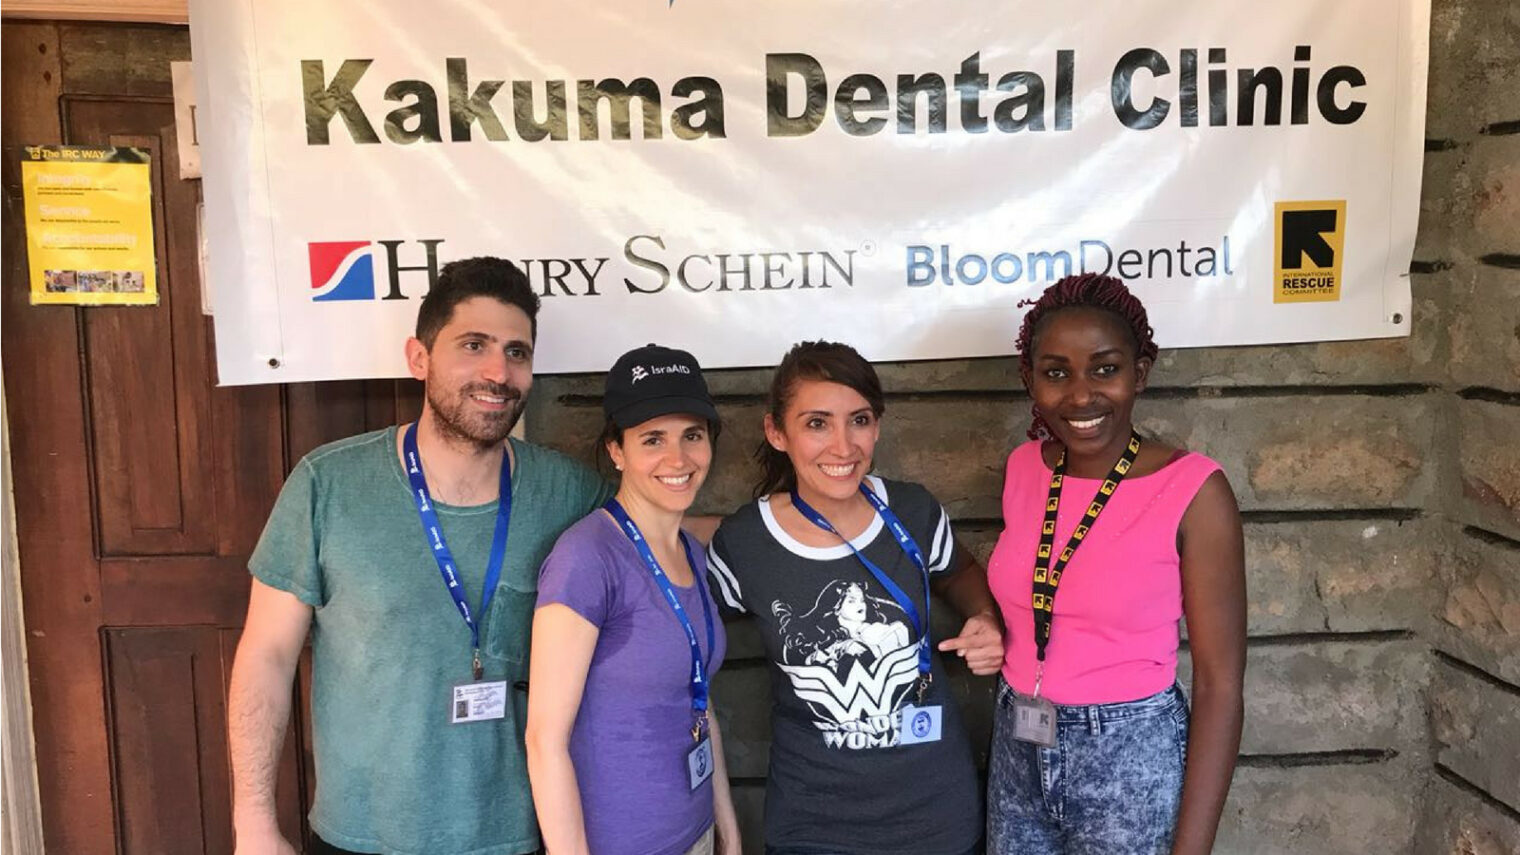 The visiting dentists from Bloom Dental with Kakuma Refugee Camp’s Dental Officer, Janeselyn, in July 2018. Photo courtesy of IsraAID